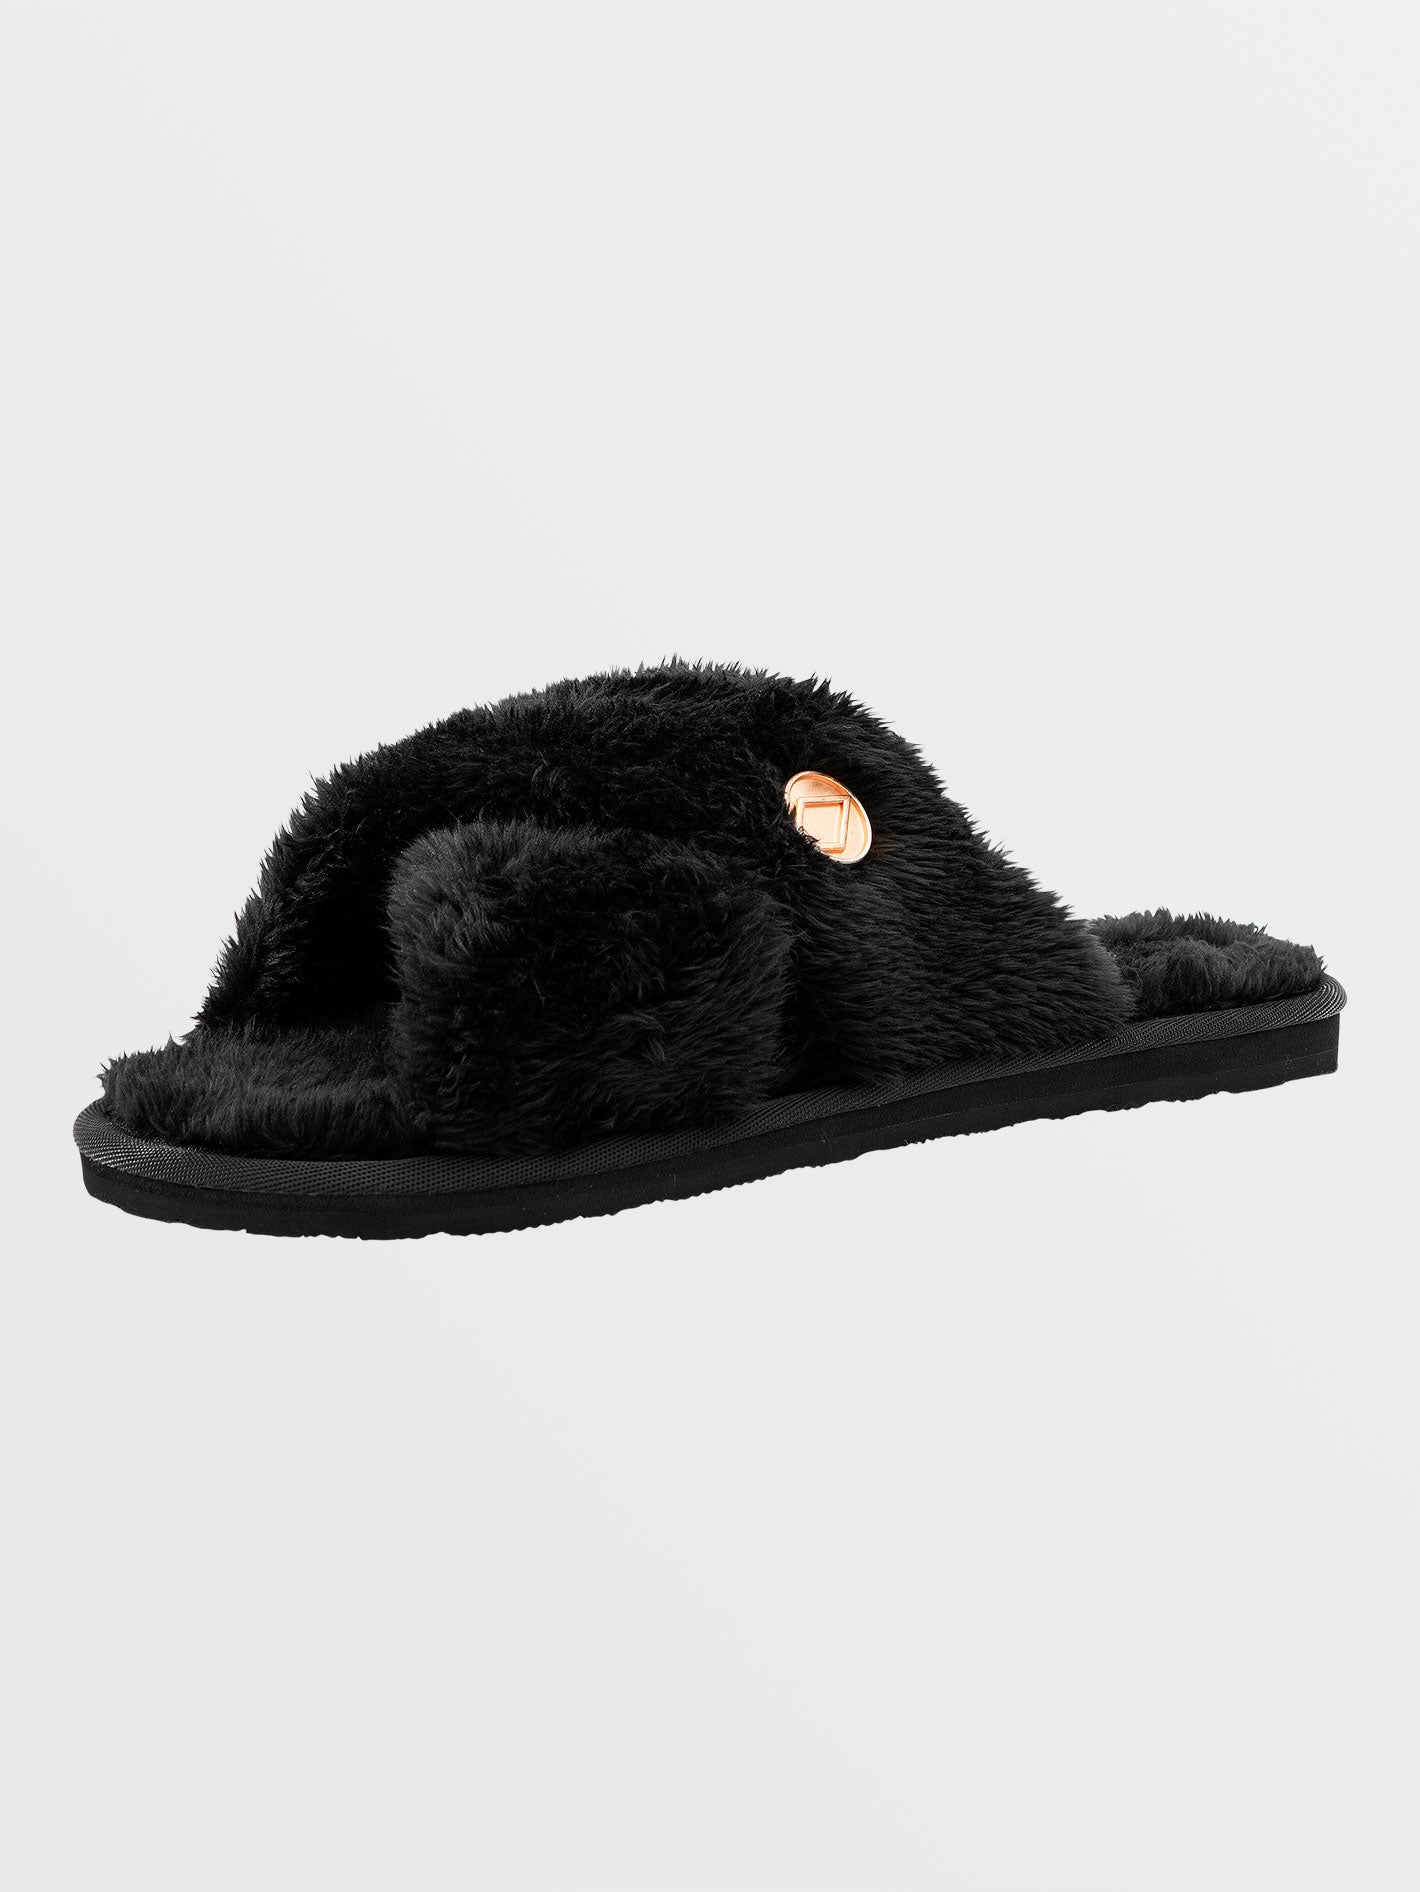 Lived In Lounge Slippers - Black – Volcom US